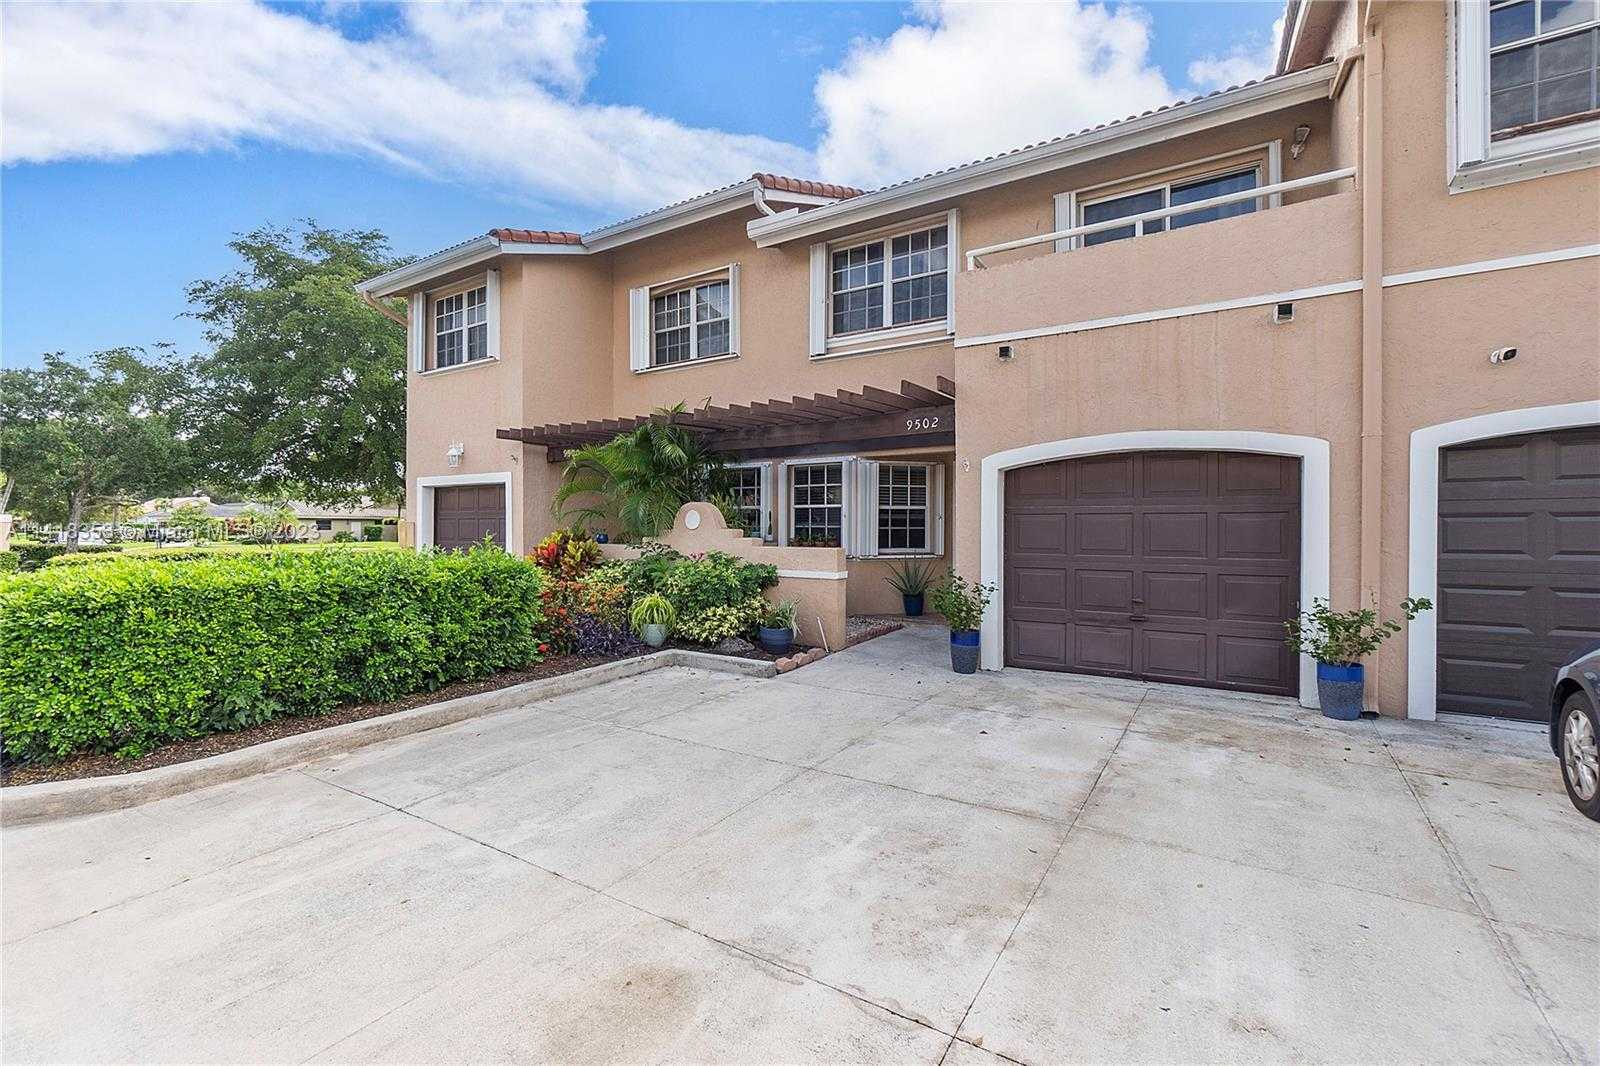 View Coral Springs, FL 33071 townhome